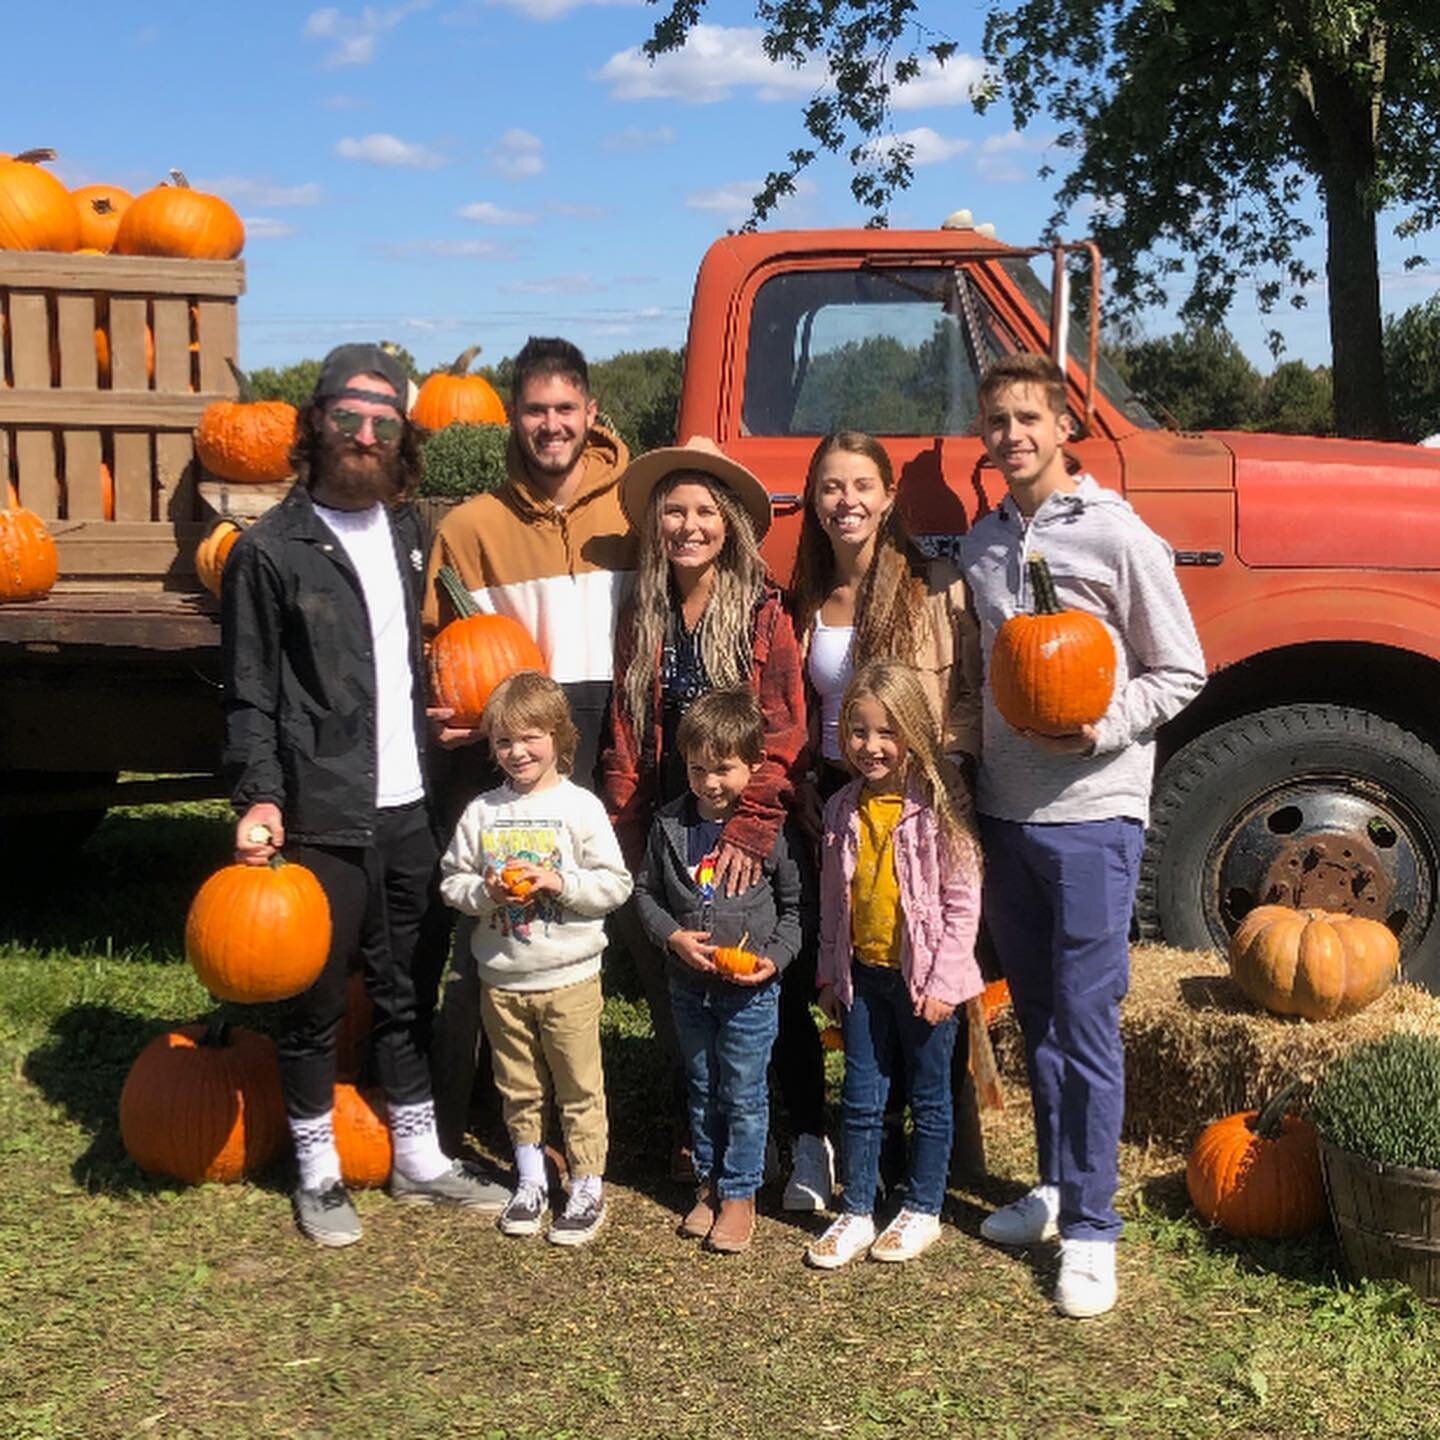 Really cool when I show up in sweatpants and then everyone puts on nice clothes just to go to a pumpkin patch. Who are we trying to impress? The pumpkins? We&rsquo;re literally gonna carve them open, why betray their trust like that. Just obnoxious ?